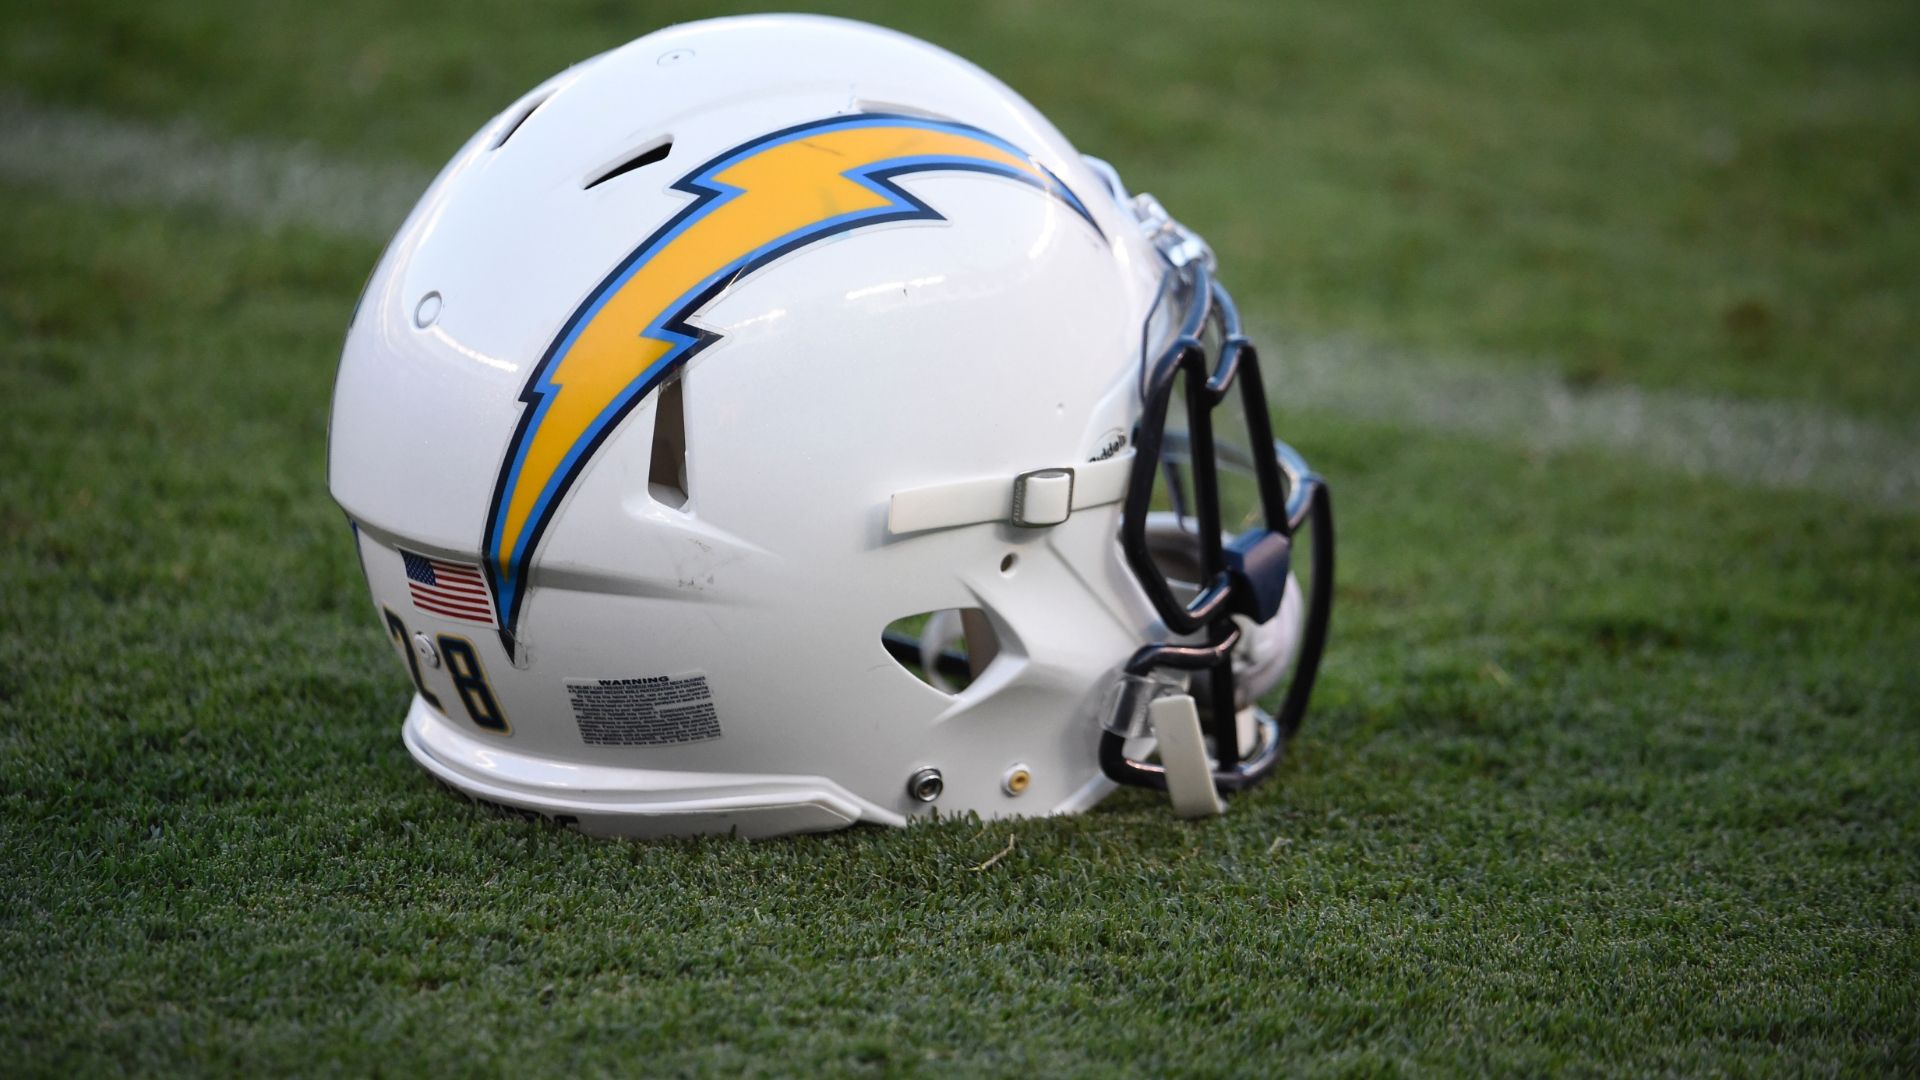 Chargers have to fight to show they belong in L.A.